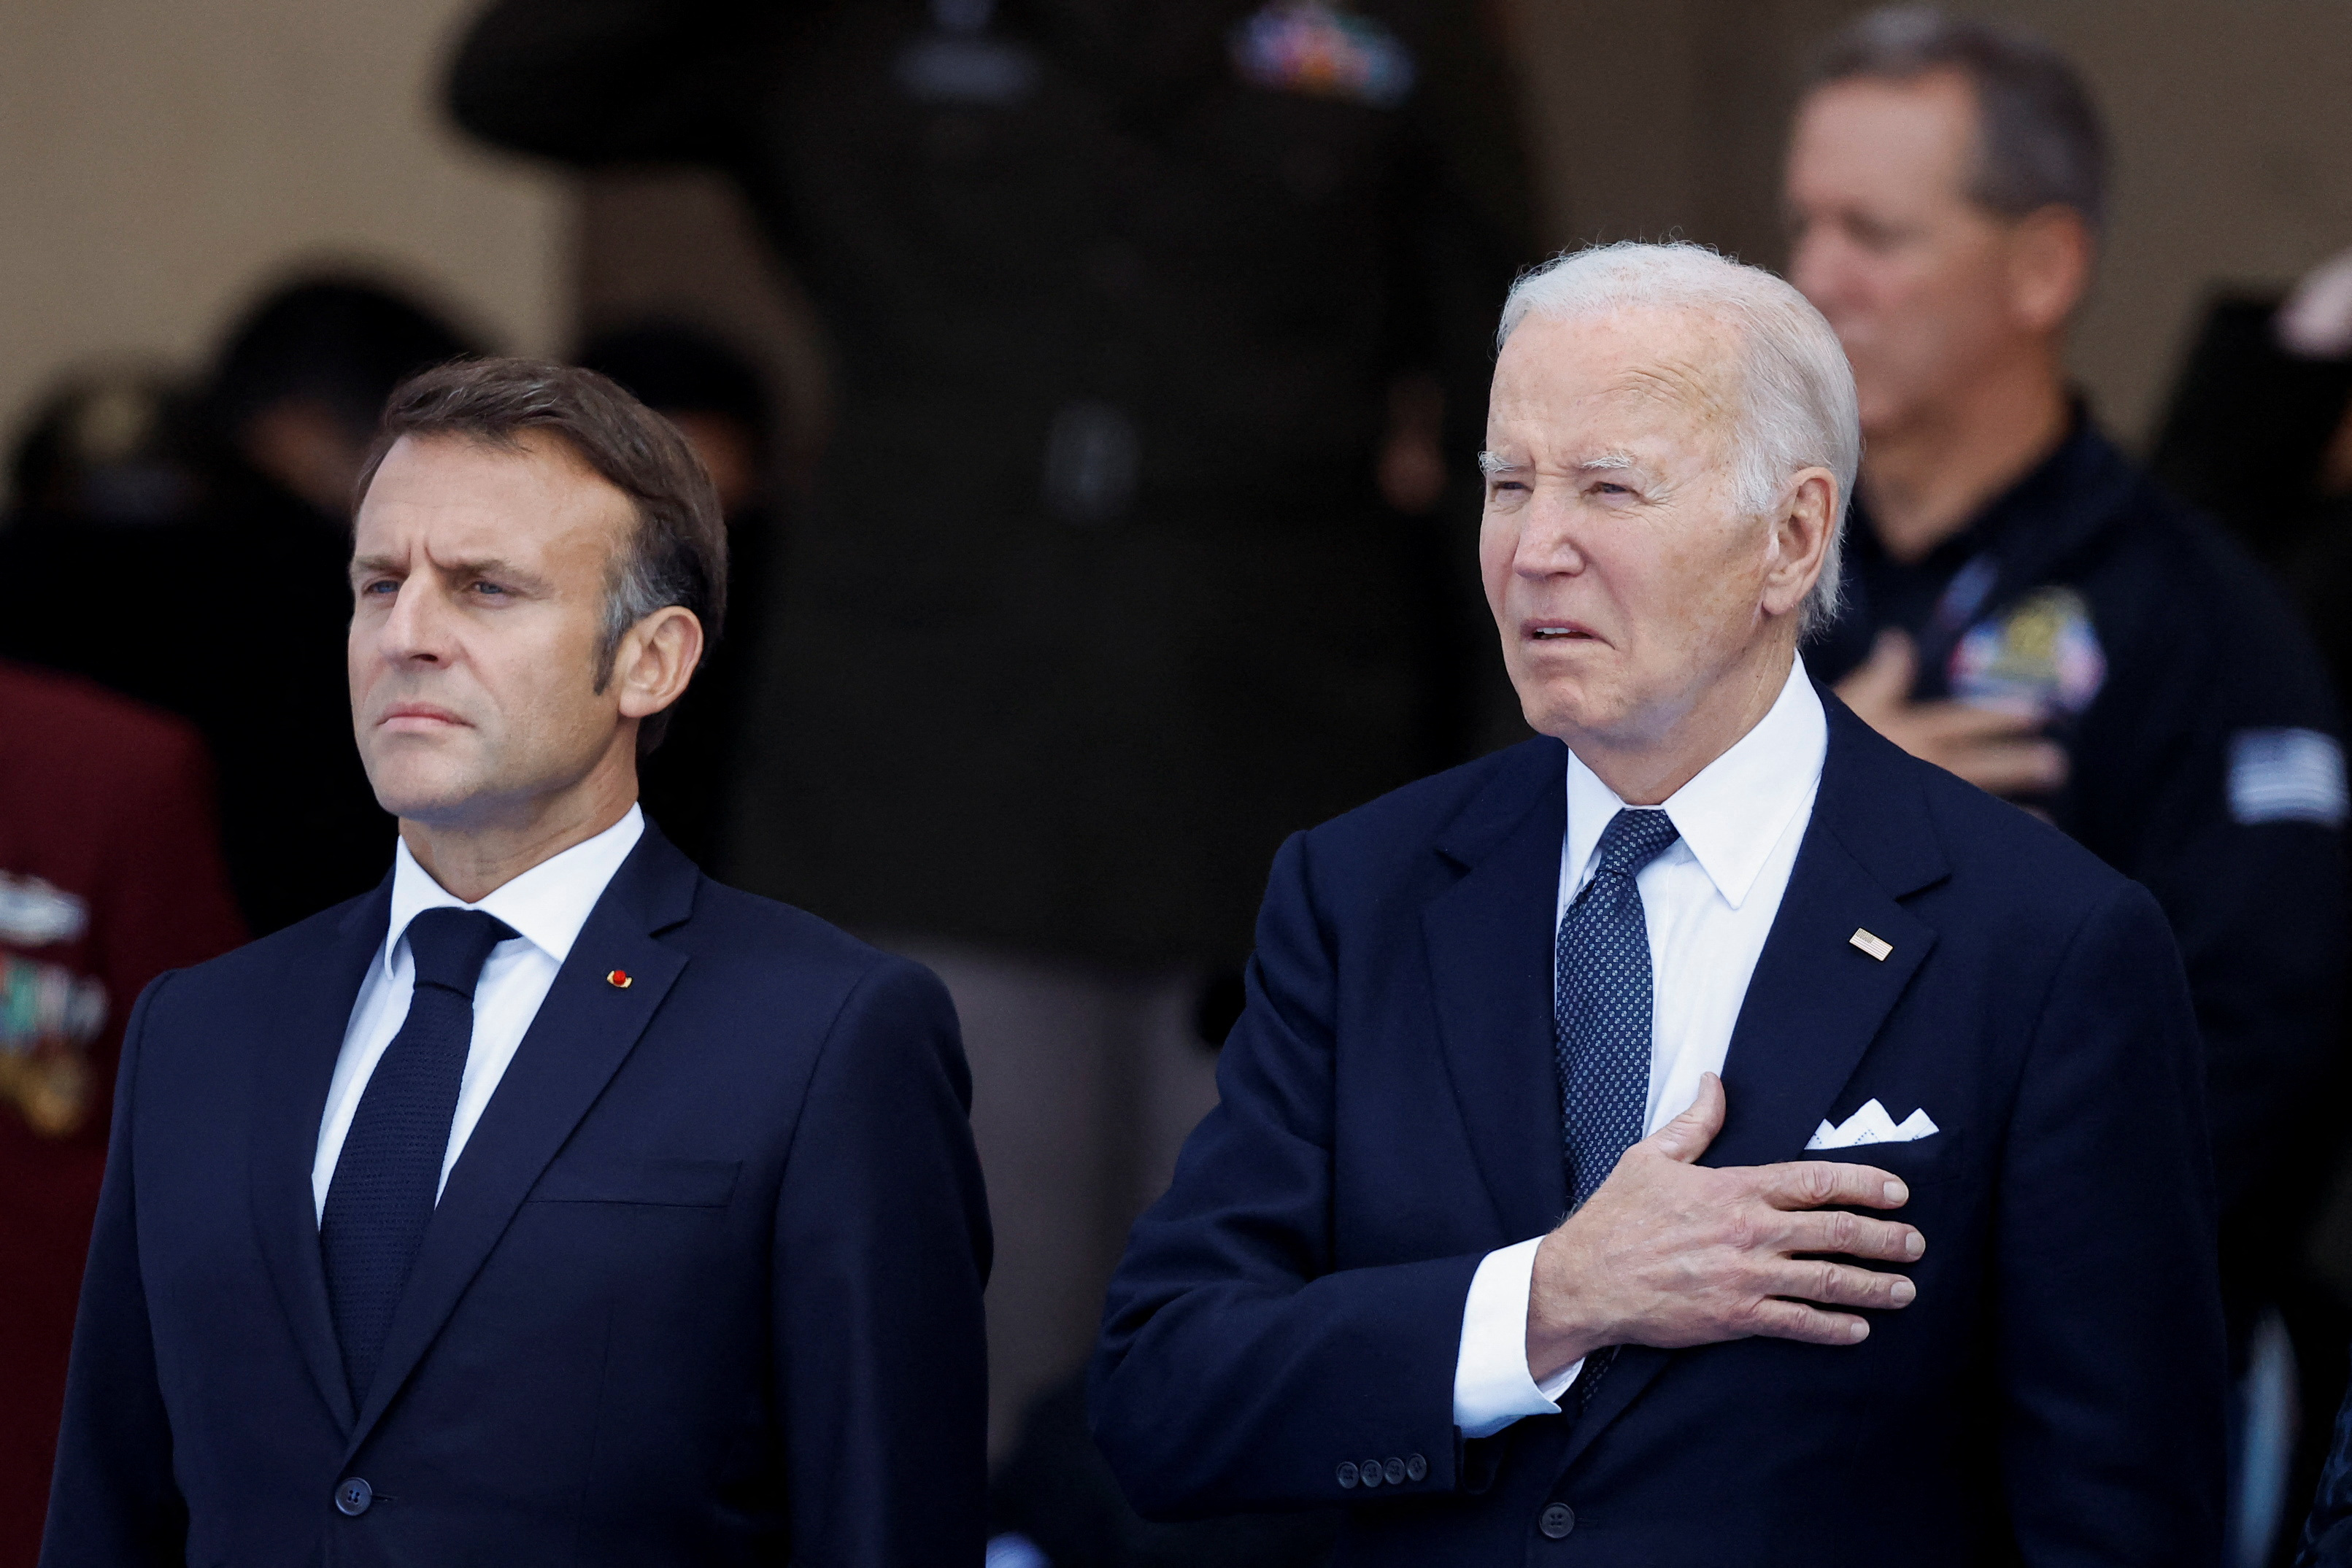 U.S. President Biden and French President Macron mark 80th D-Day anniversary in Normandy